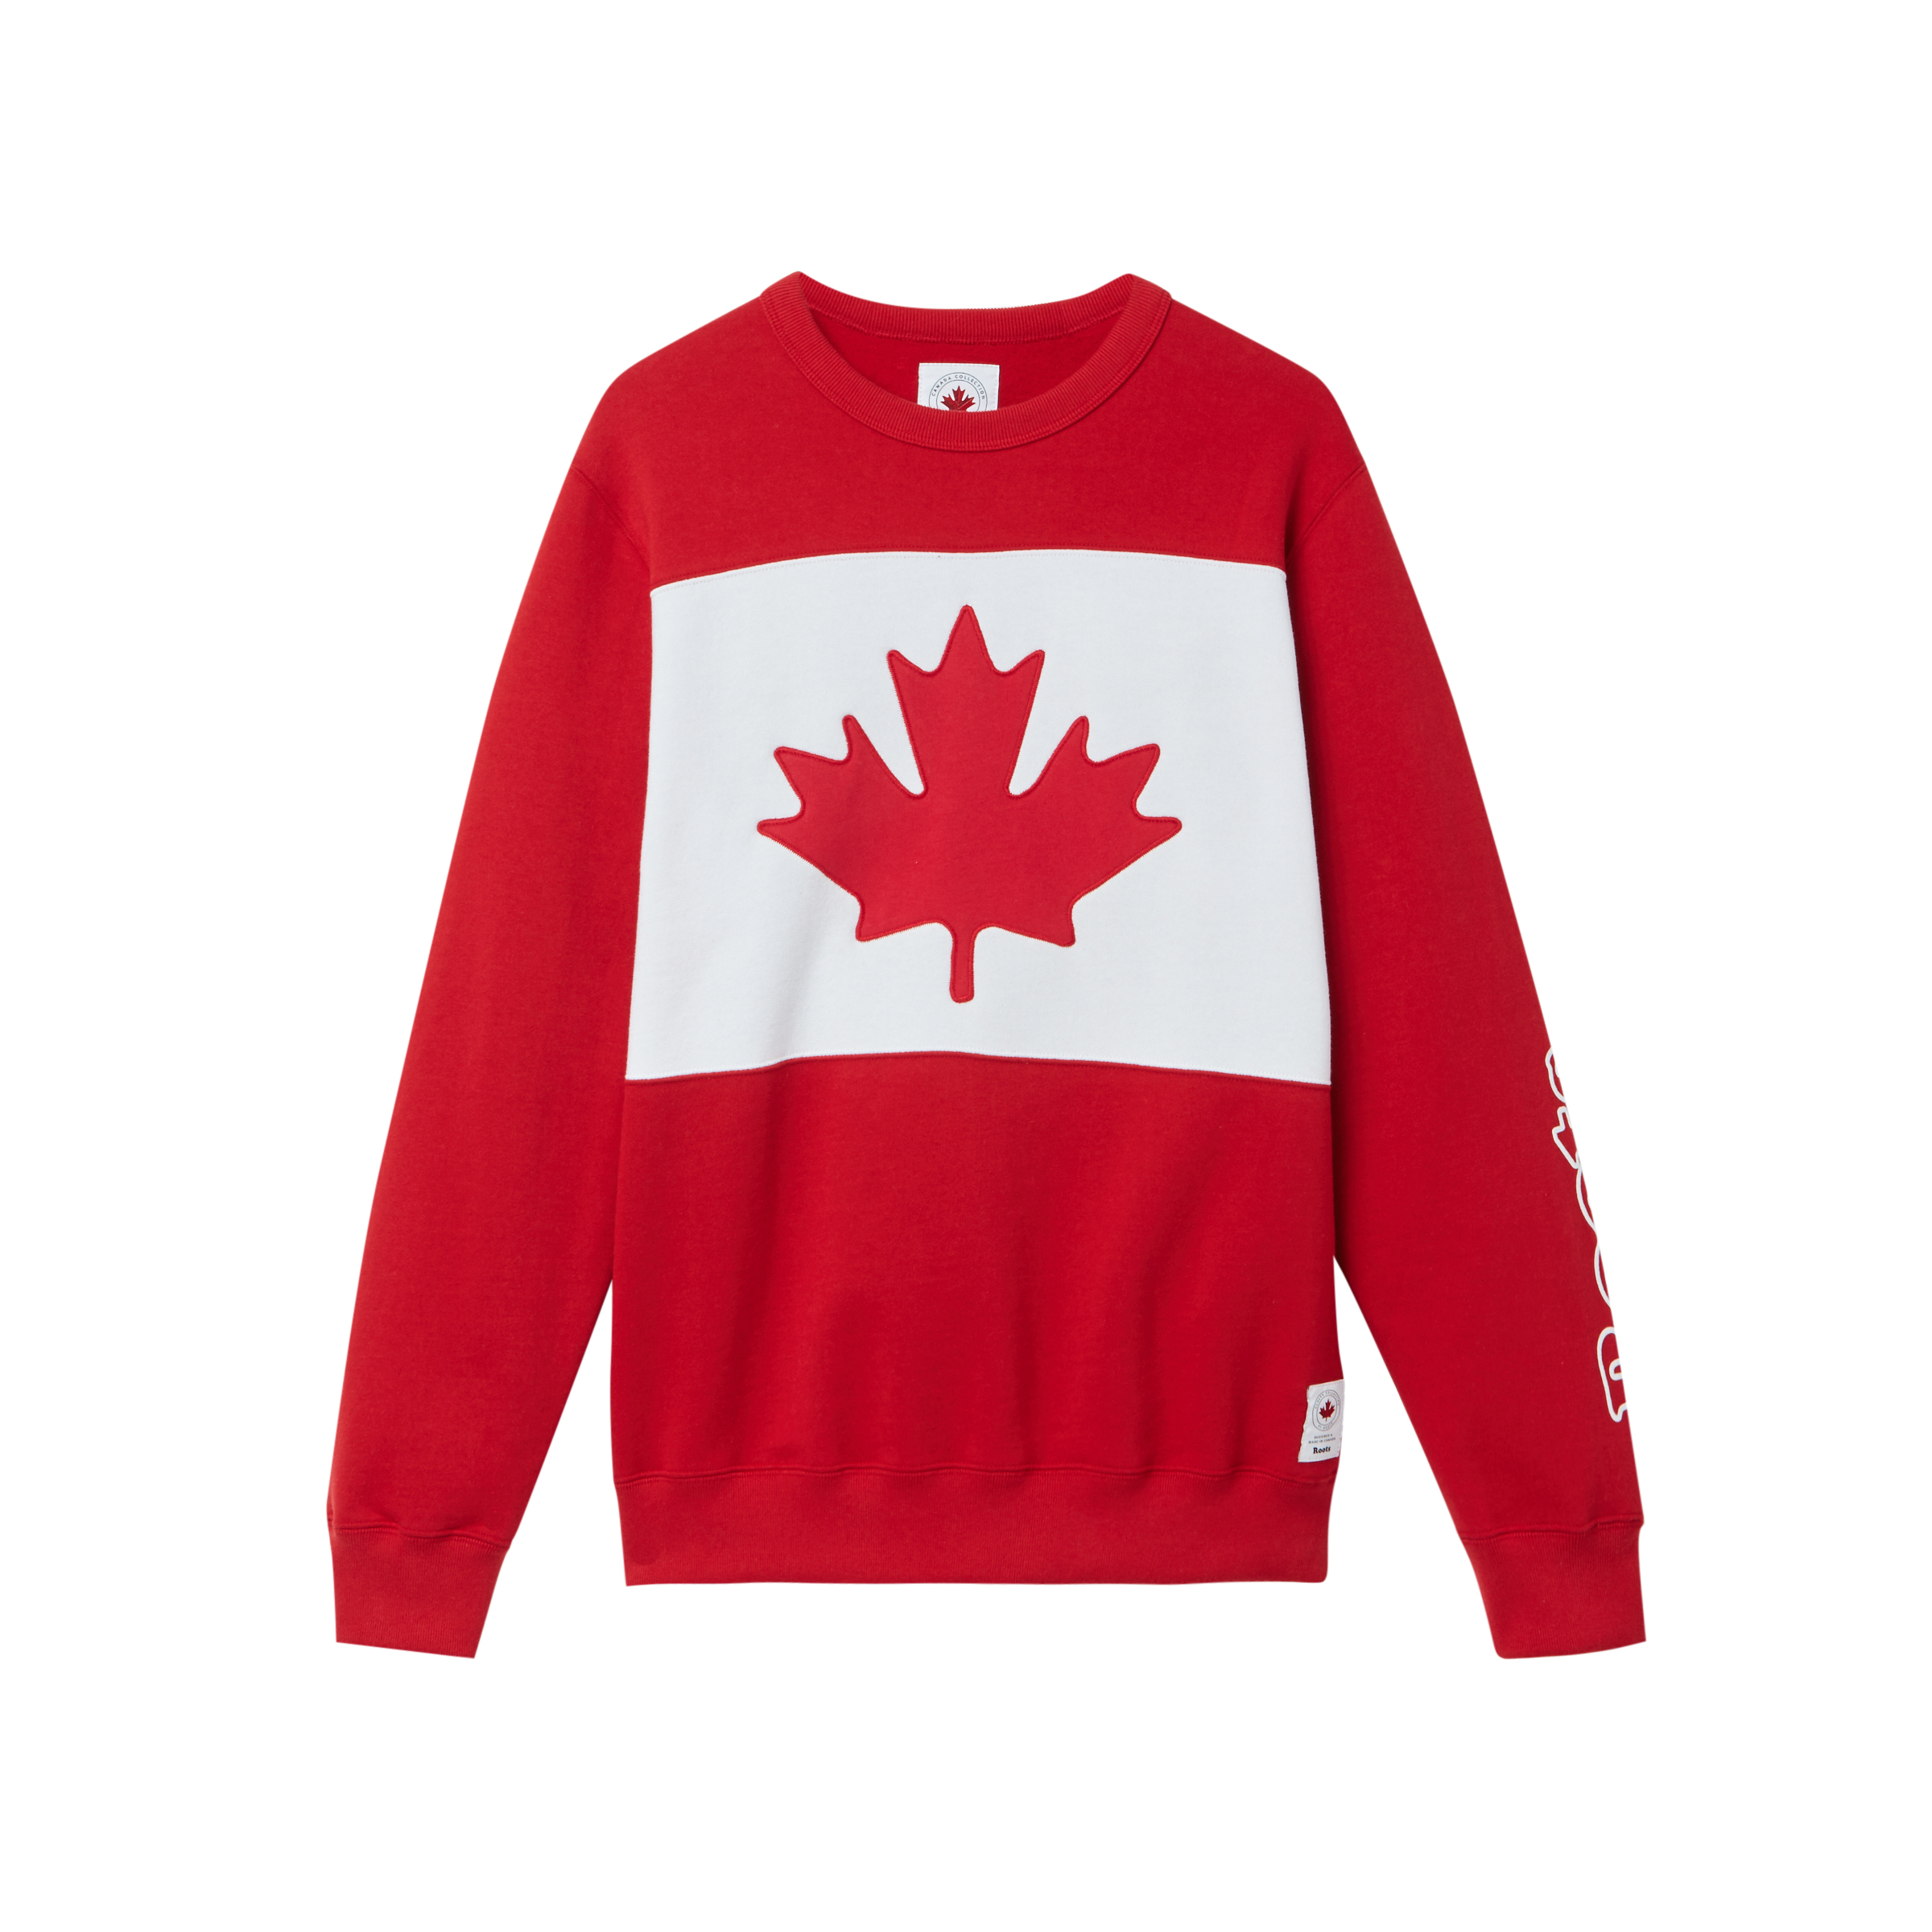 travel clothing brands canada